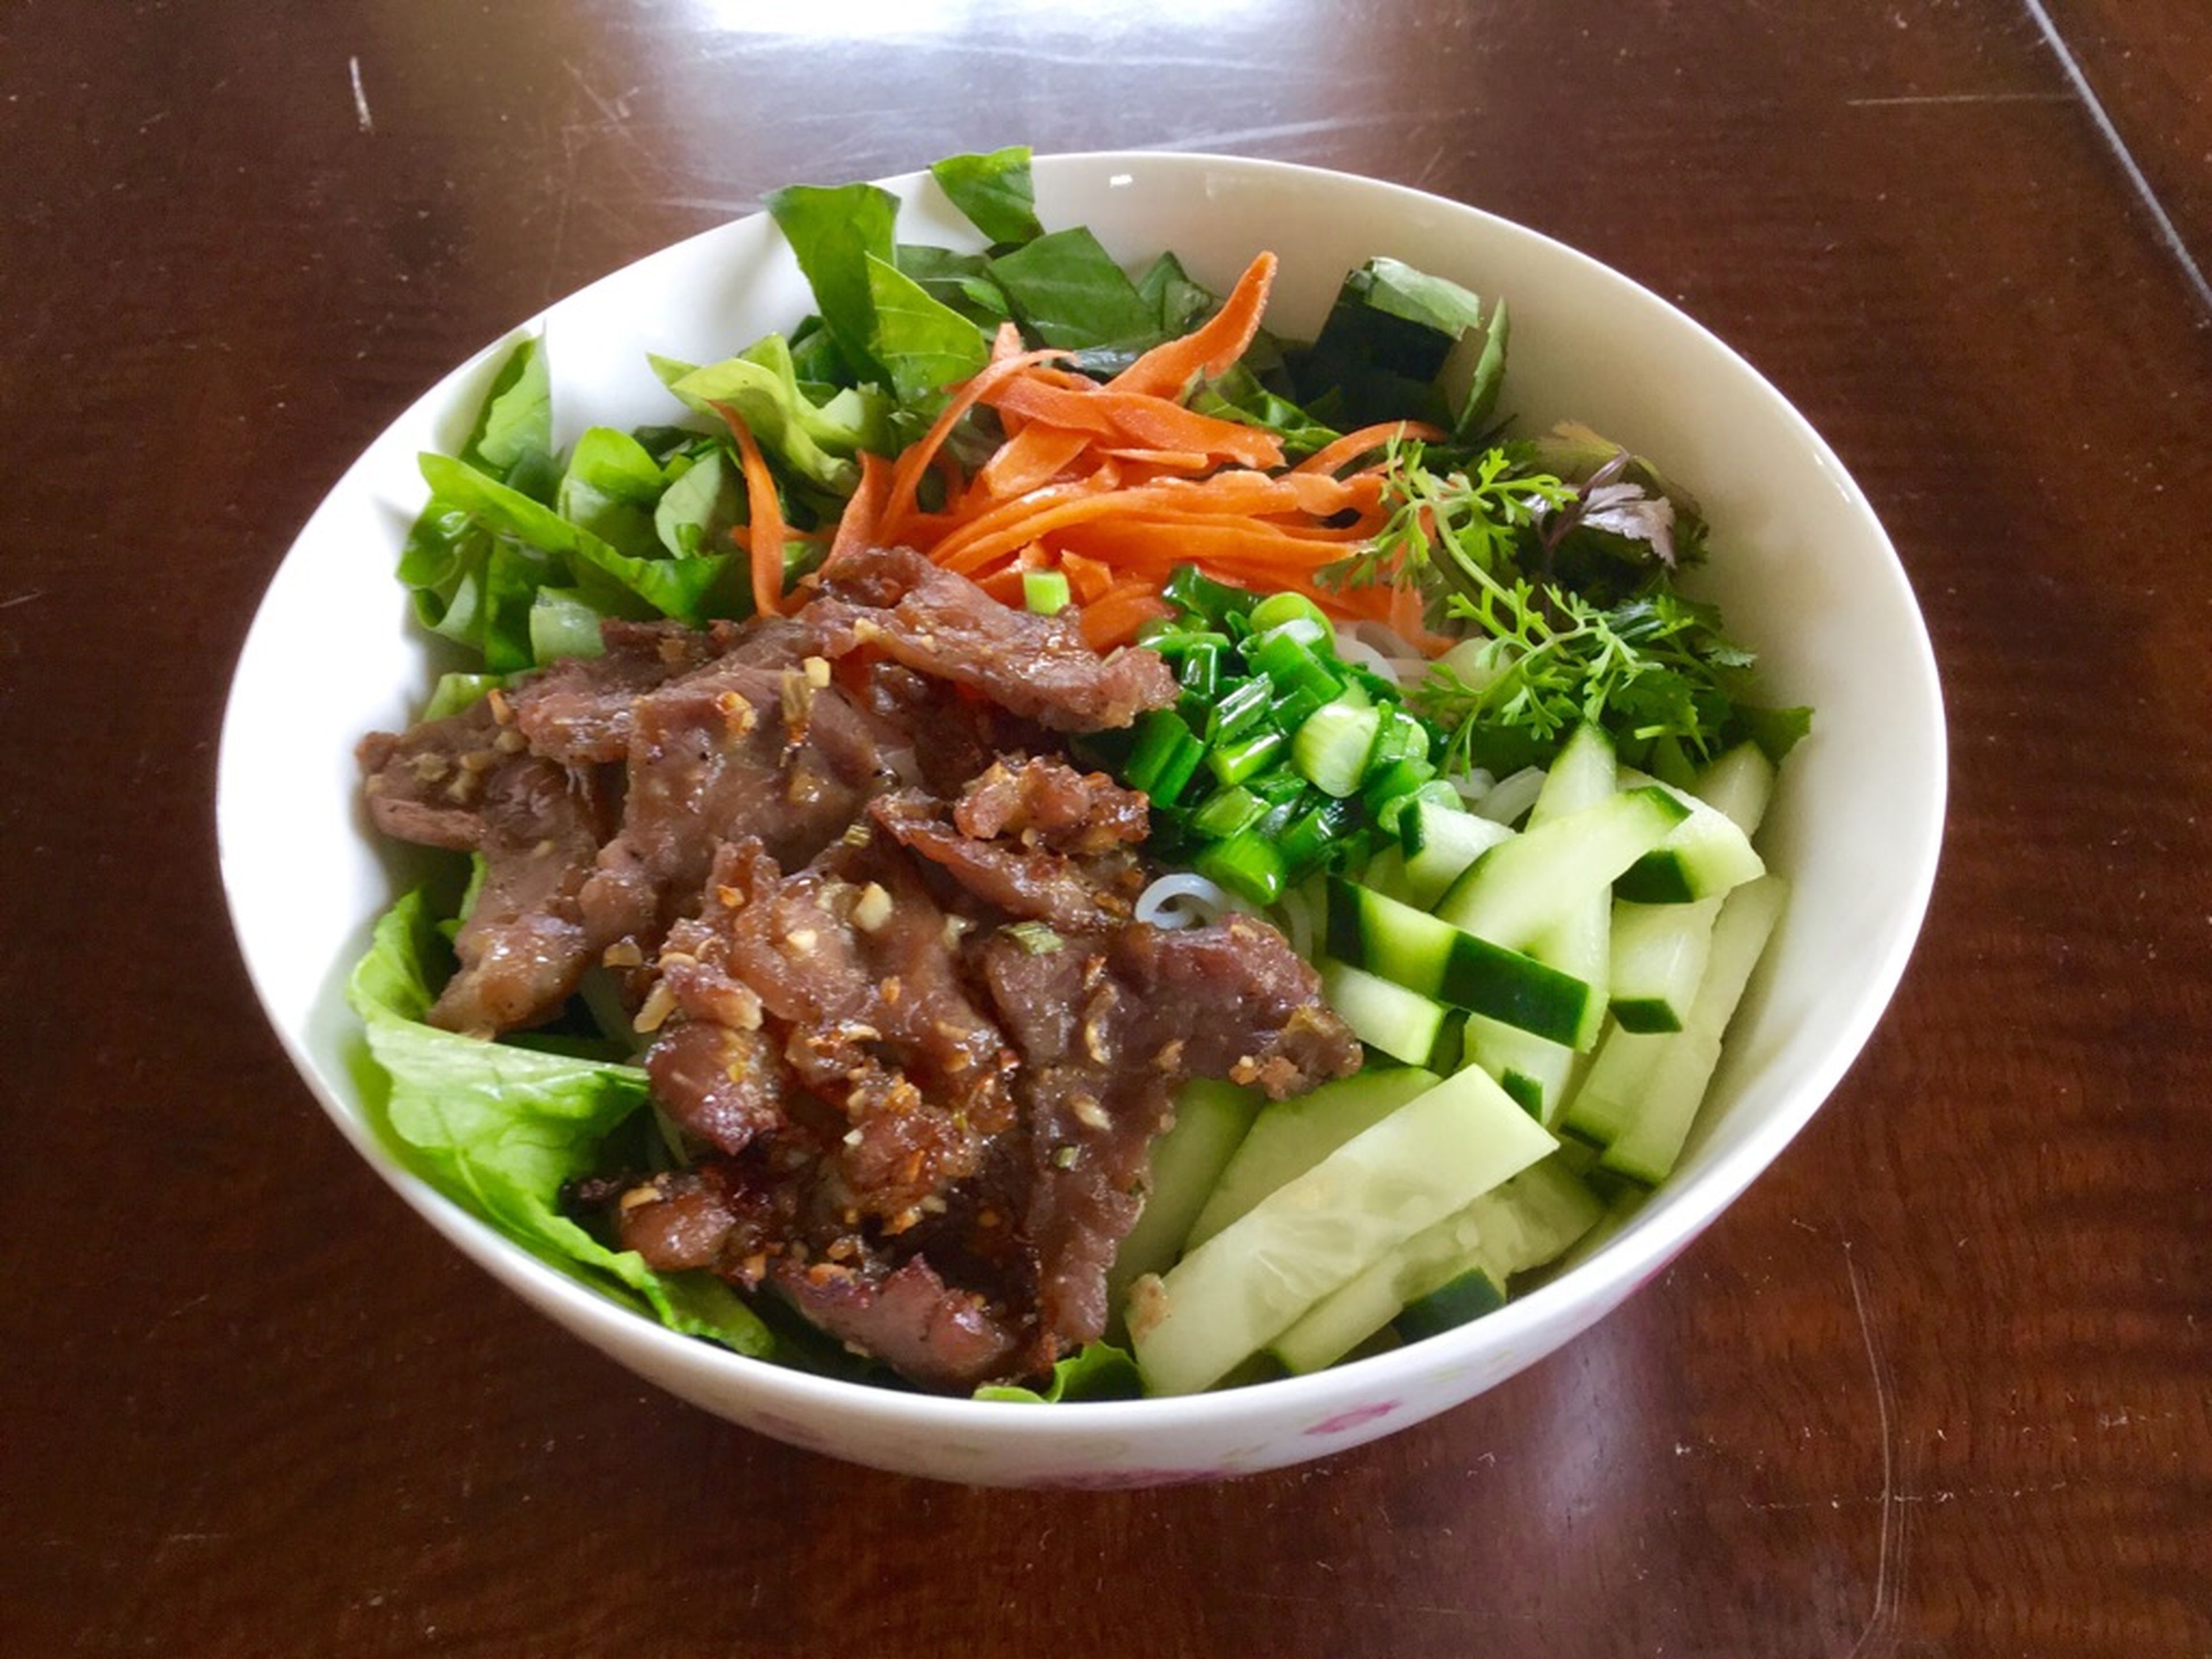 Add lettuce and rice noodles to a serving bowl. Top with other vegetables and baked pork. Add the sauce, serve, and enjoy!